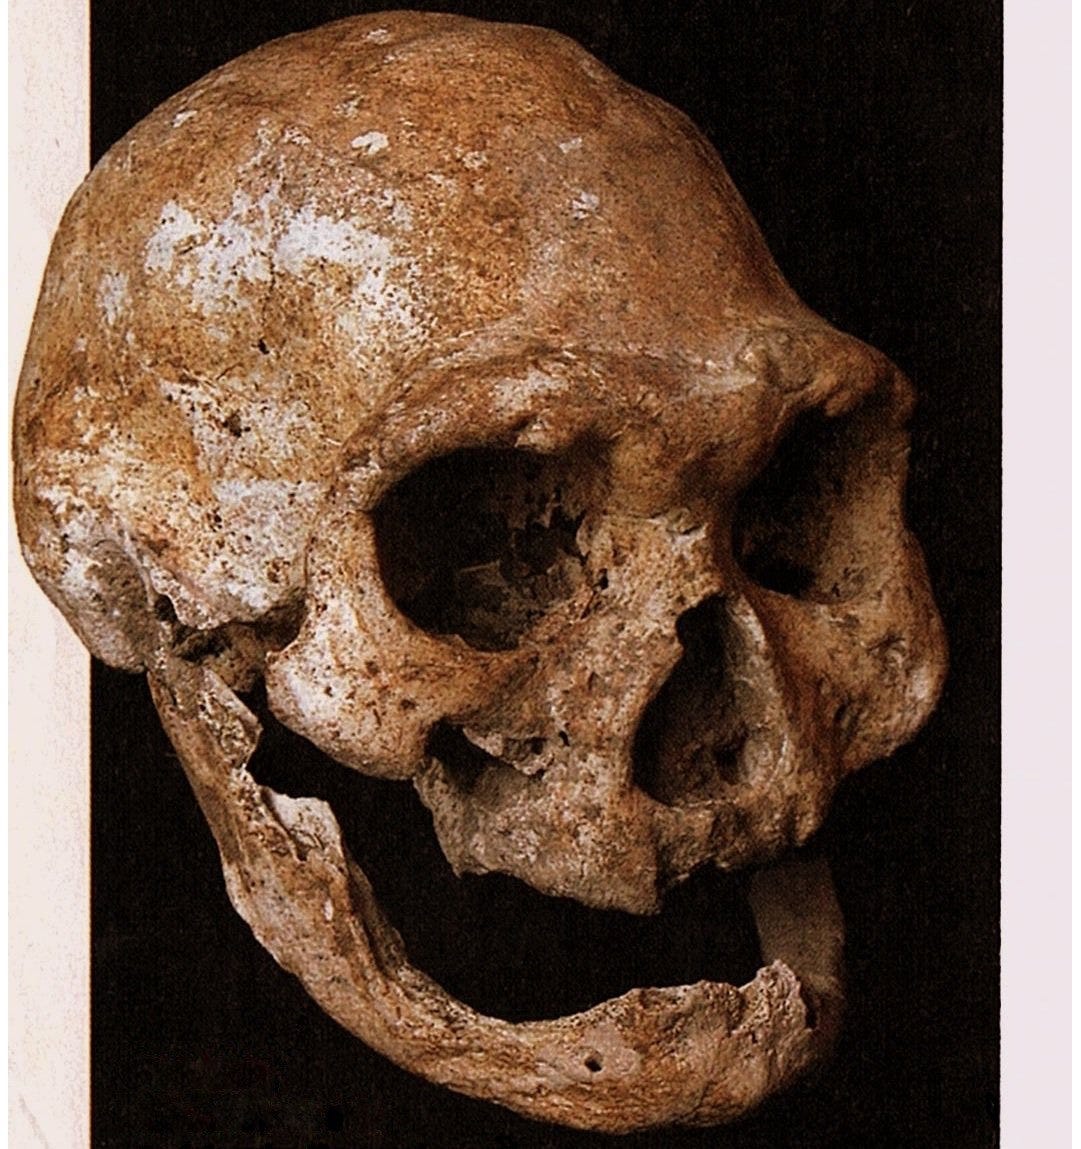 Homo habilis—A Premature Discovery: Remembered by One of Its